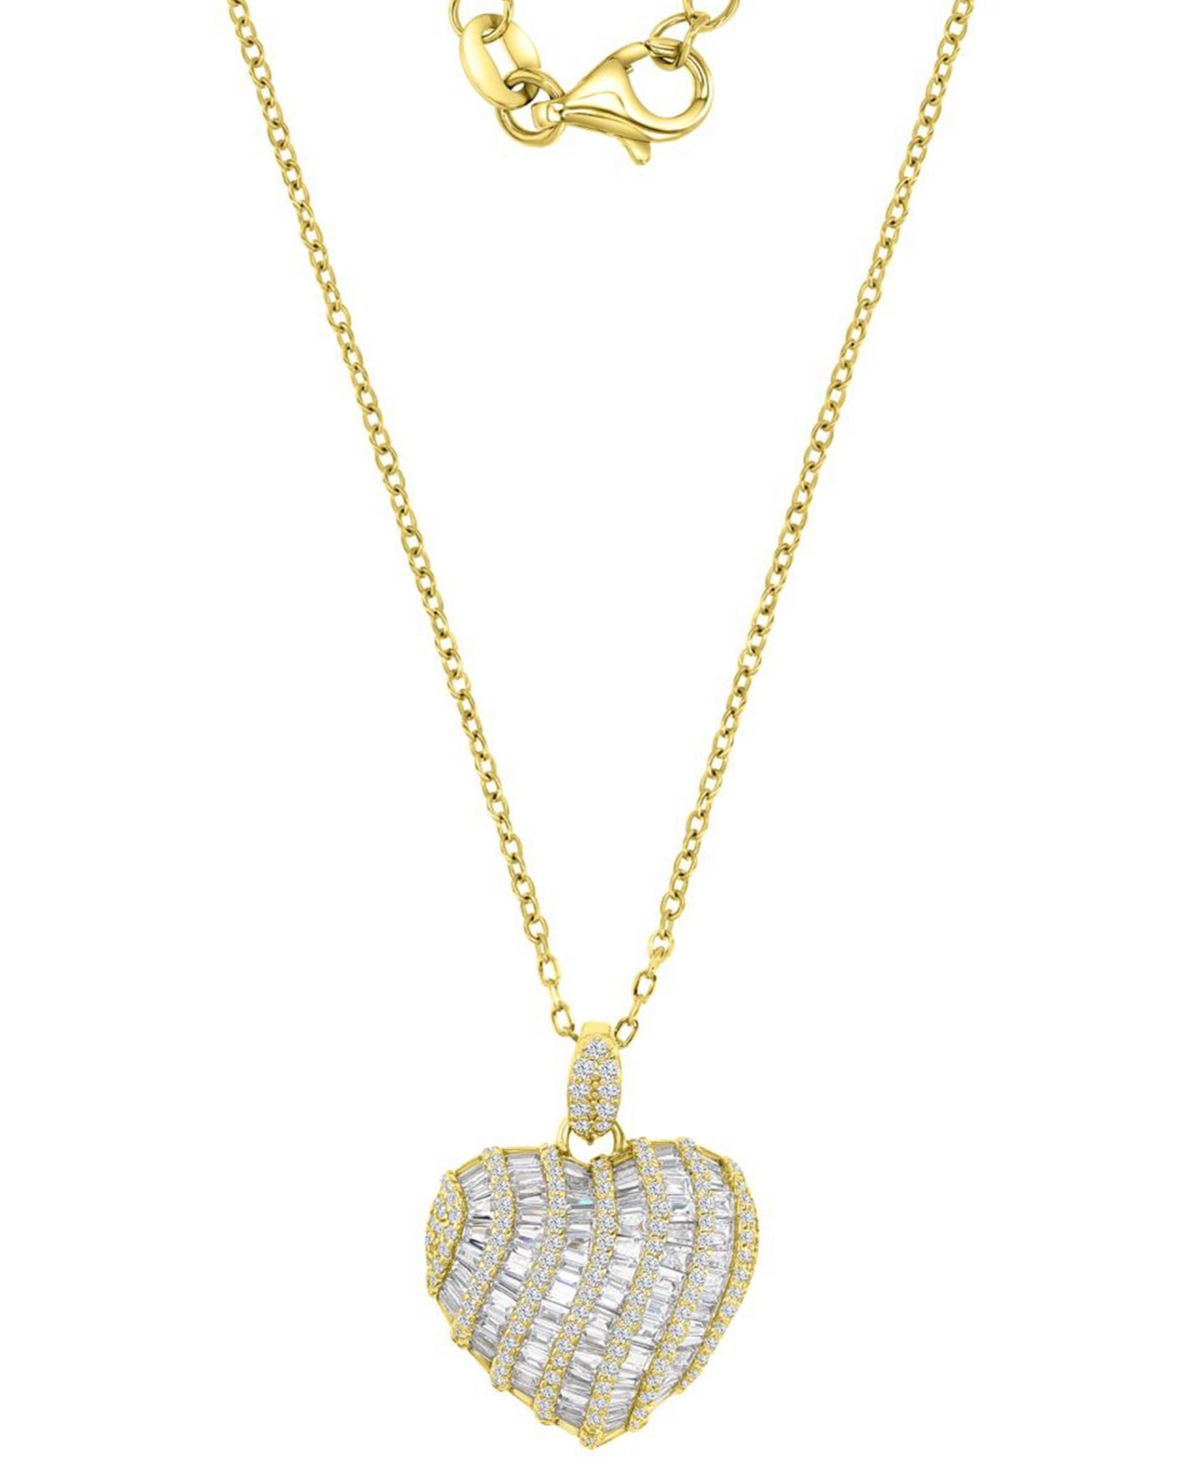 Cubic Zirconia Round & Baguette Heart Pendant Necklace in 14k Gold-Plated Sterling Silver, 16" + 2" extender - Gold